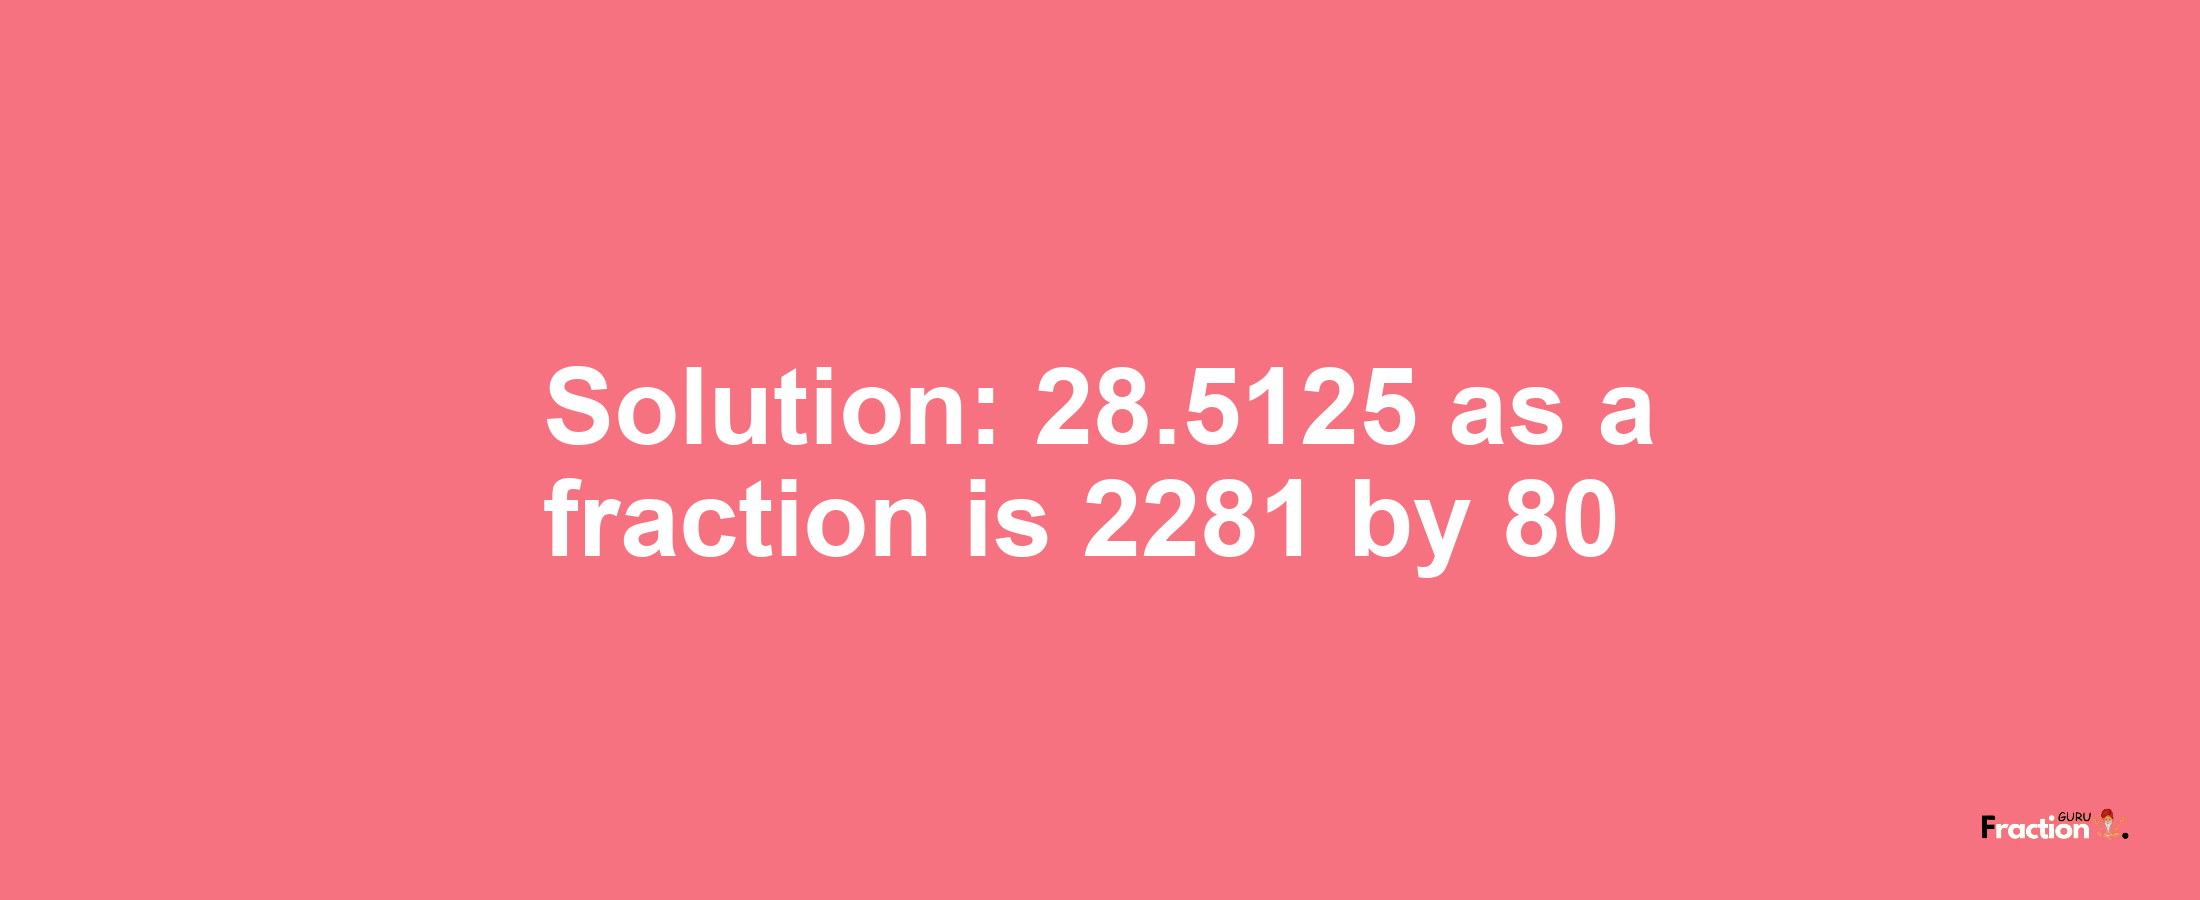 Solution:28.5125 as a fraction is 2281/80